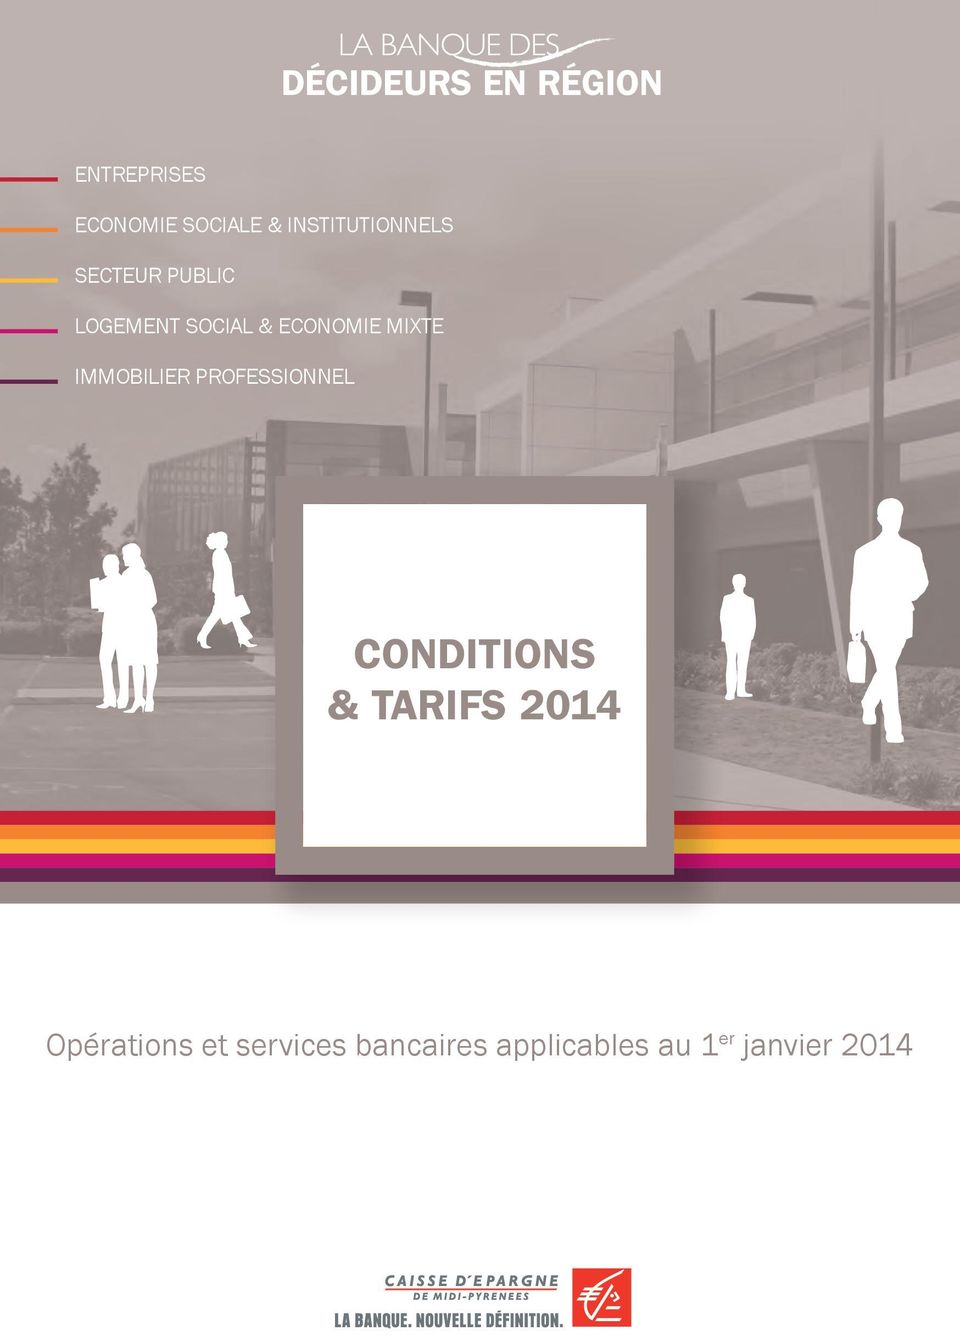 MIXTE IMMOBILIER PROFESSIONNEL CONDITIONS & TARIFS 2014